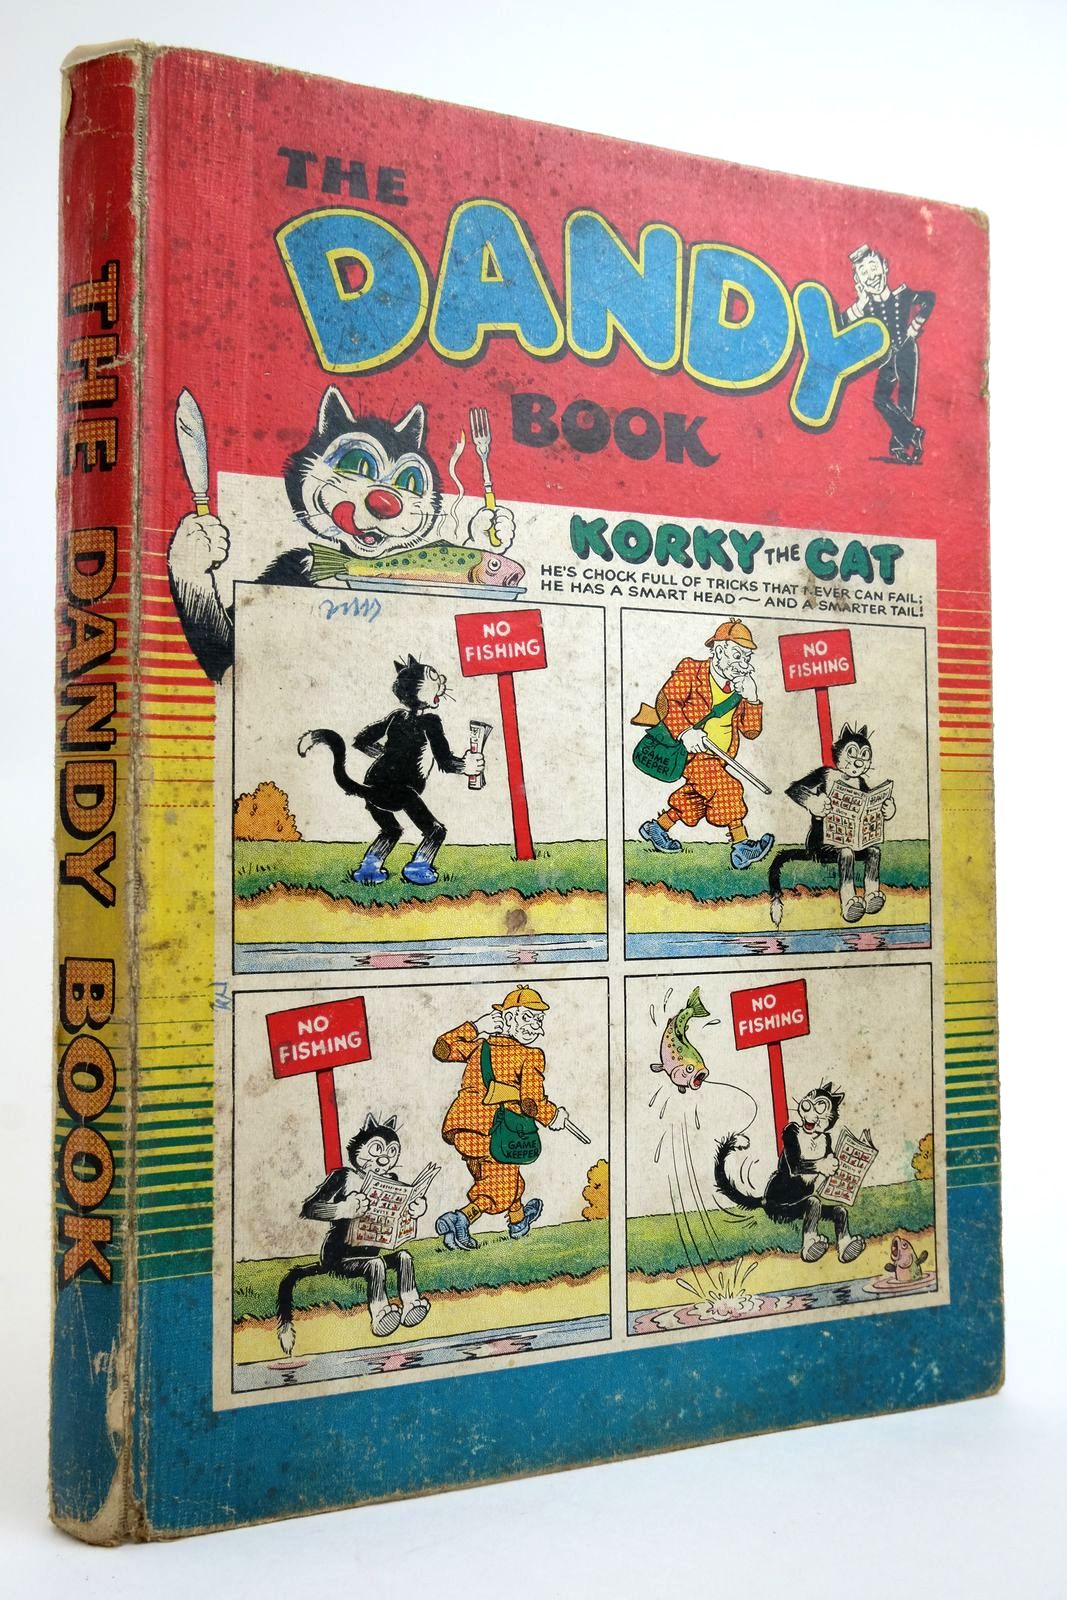 Photo of THE DANDY BOOK 1955 published by D.C. Thomson & Co Ltd. (STOCK CODE: 2135523)  for sale by Stella & Rose's Books